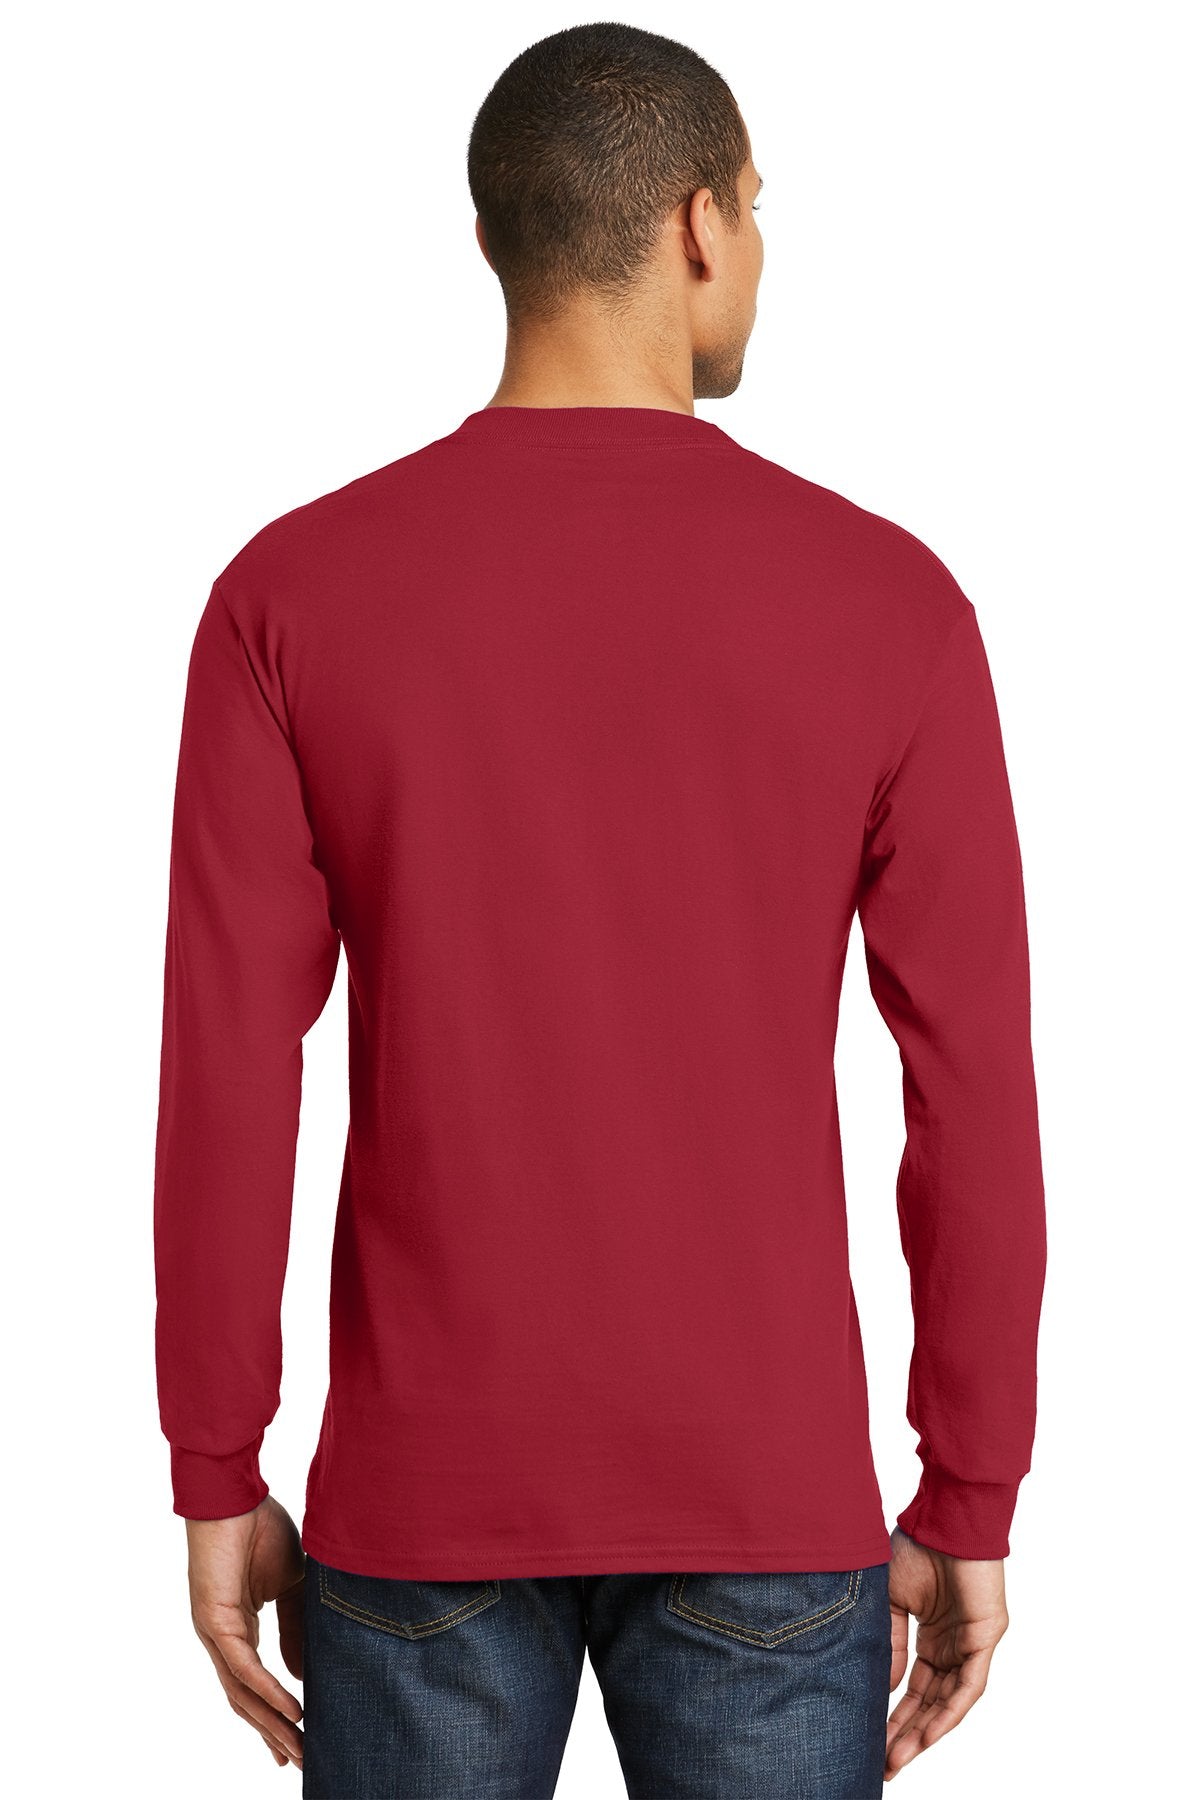 hanes beefy t cotton long sleeve t shirt 5186 deep red